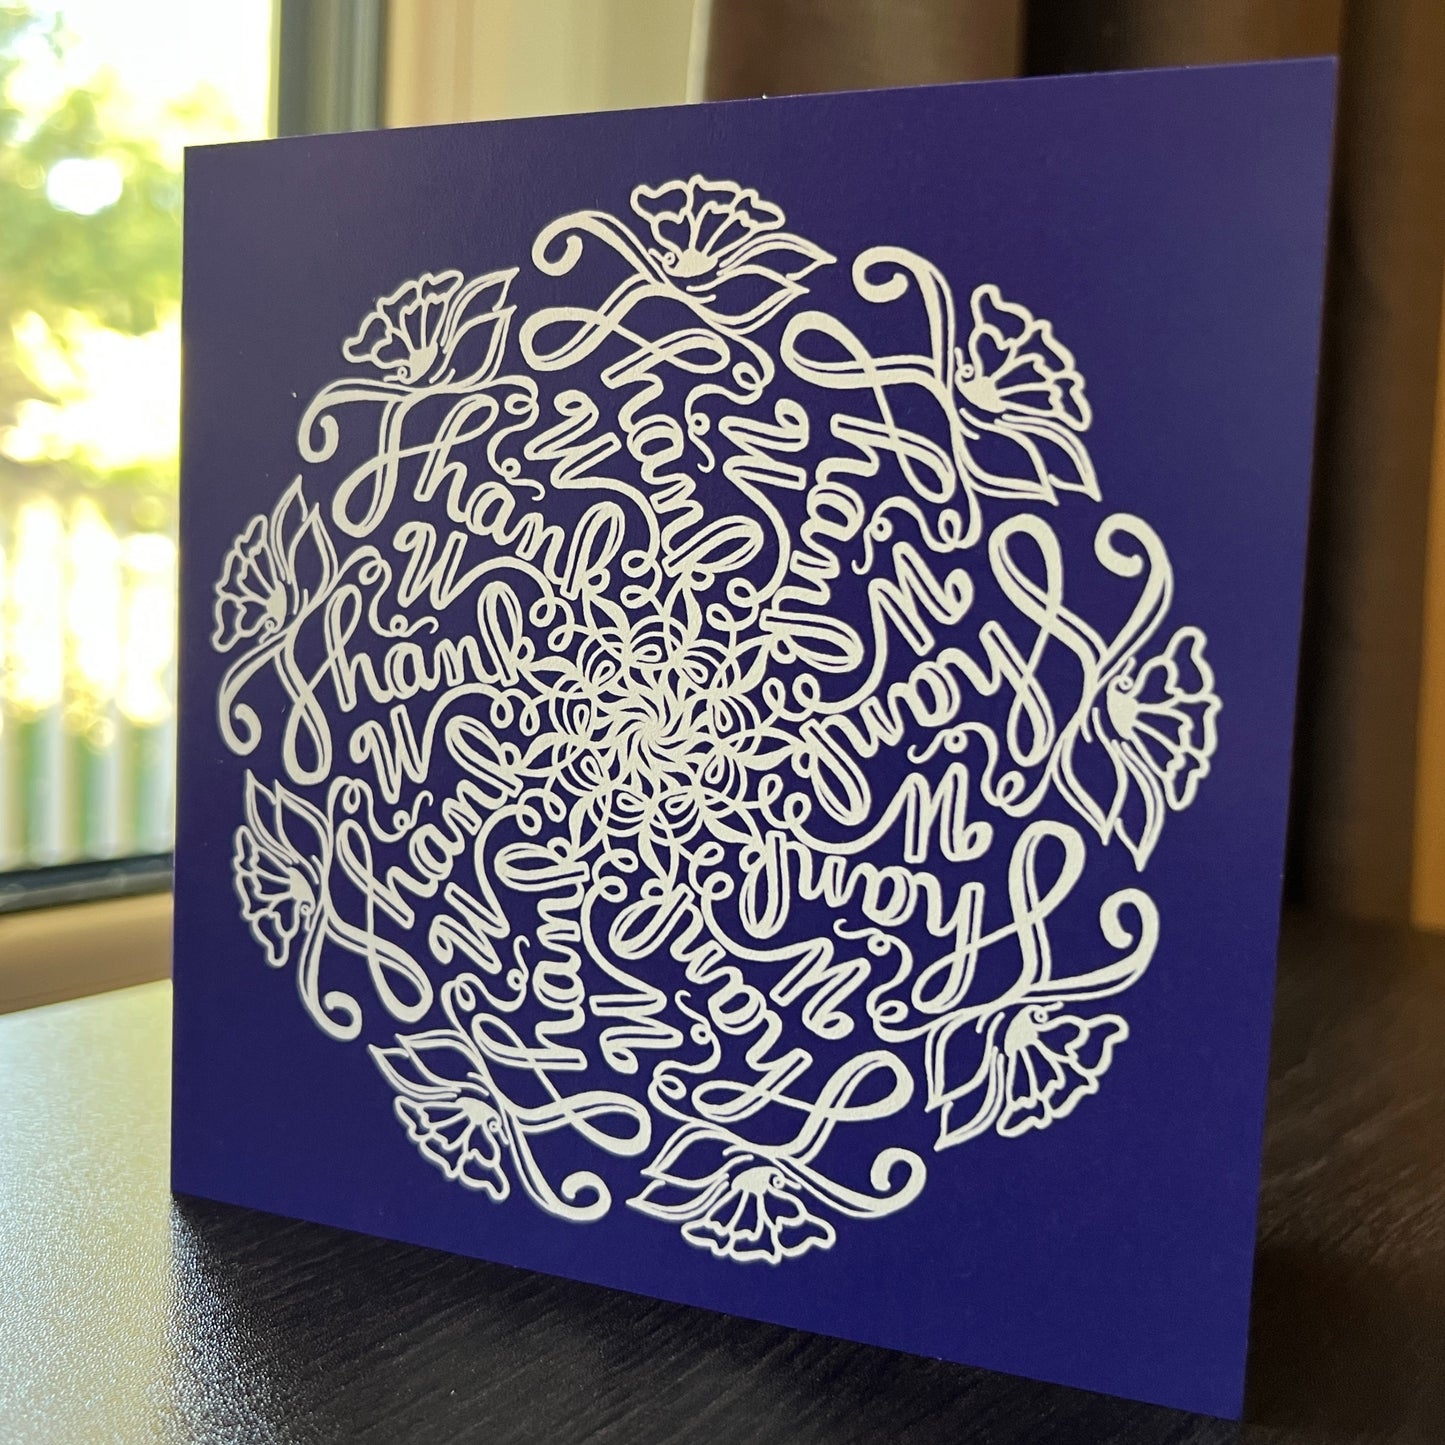 This hidden word Mandala greeting card allows the sender to say “Thank you” in a beautiful and creative Way.  The card has a deep purple background, on which a striking white mandala is printed.  The Mandala features the phrase “Thank U” nine times in a mesmerizing swirling pattern, and the pattern is adorned with flowers, leaves, and vines. This is a picture on a desk with a natural background Newwingstudio.com